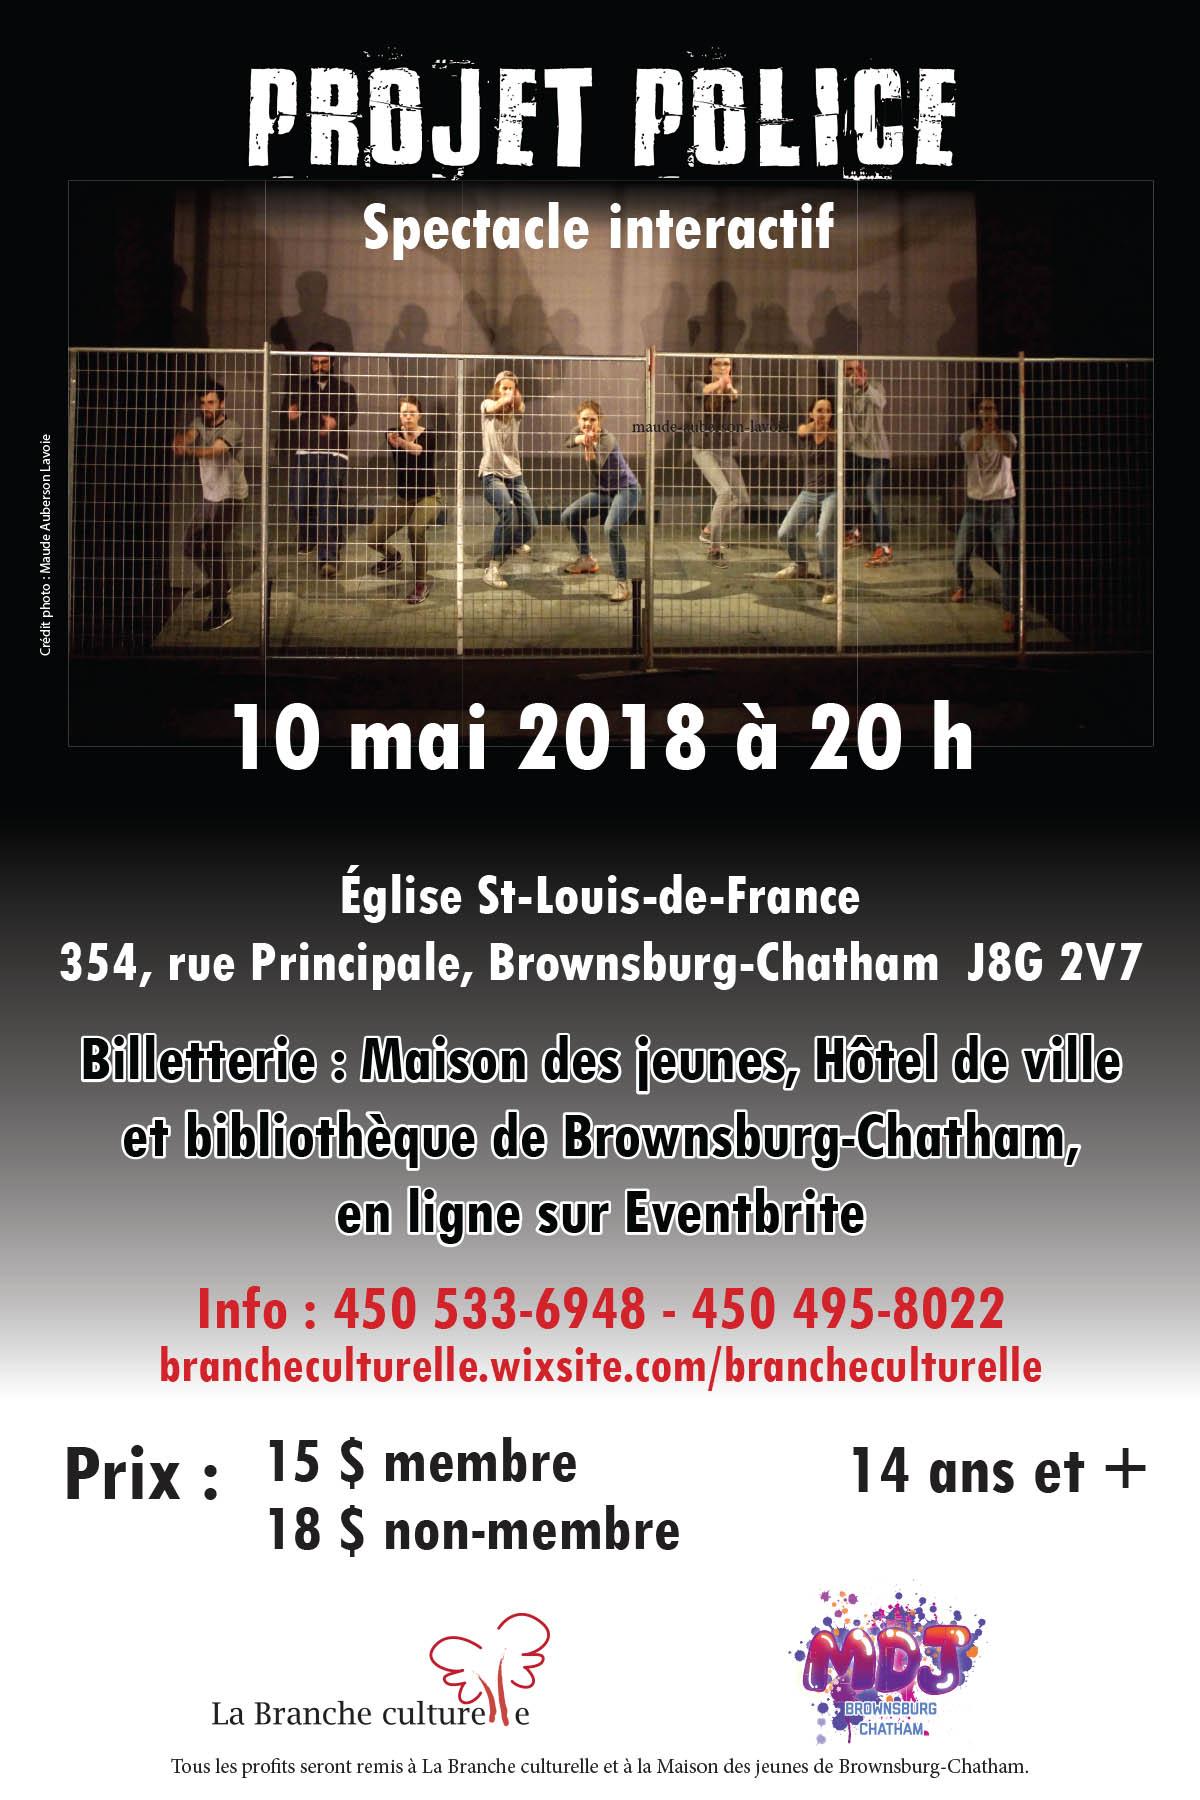 Prôjet Police – a theatre piece presented at St-Louis-de-France Church in Brownsburg